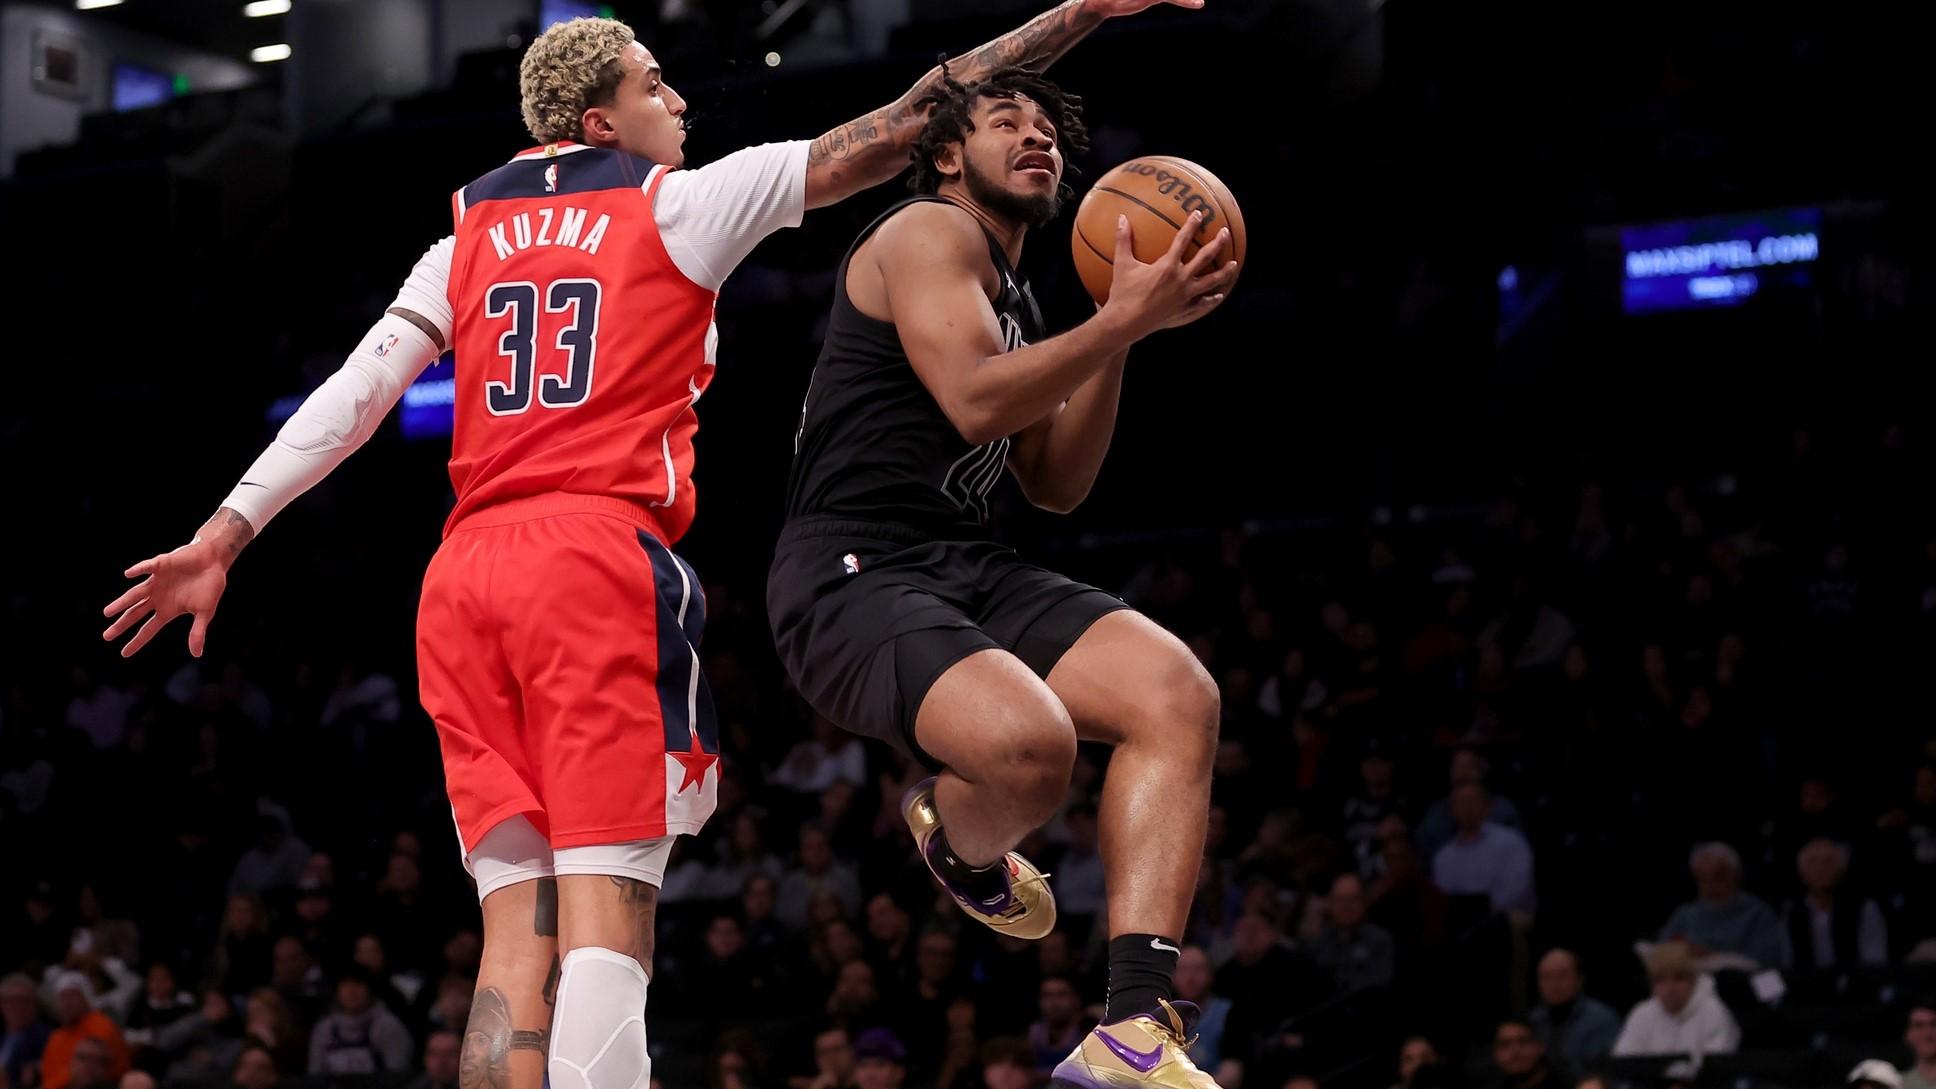 Dec 8, 2023; Brooklyn, New York, USA; Brooklyn Nets guard Cam Thomas (24) drives to the basket against Washington Wizards forward Kyle Kuzma (33) during the first quarter at Barclays Center. / Brad Penner-USA TODAY Sports